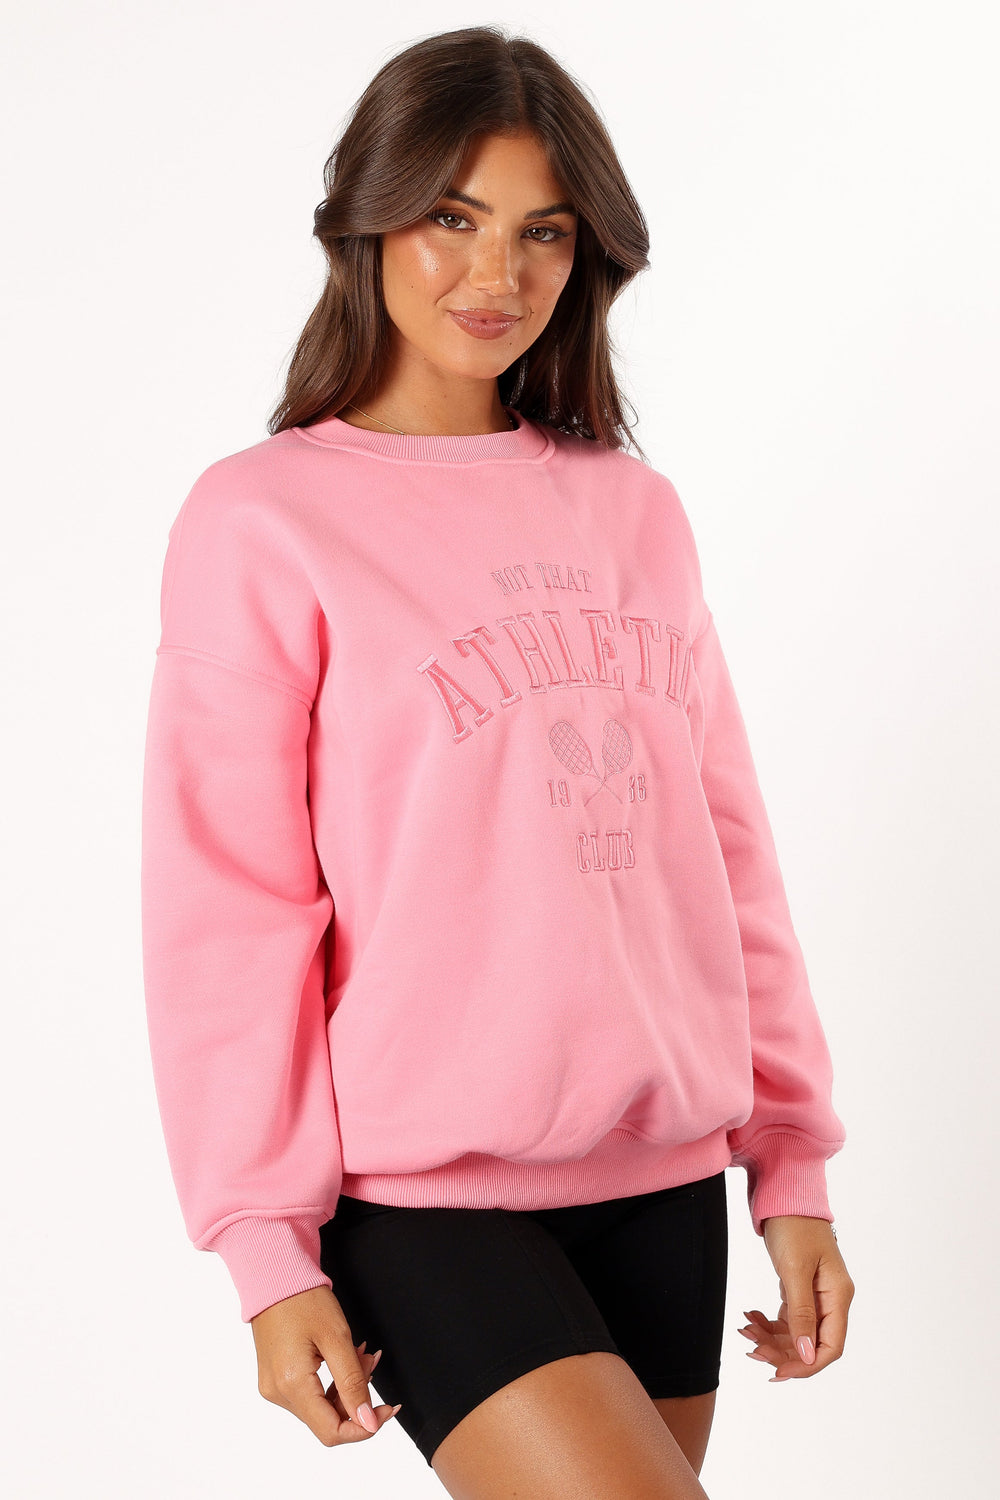 Petal and Pup USA OUTERWEAR Cora Athletic Sweatshirt - Pink